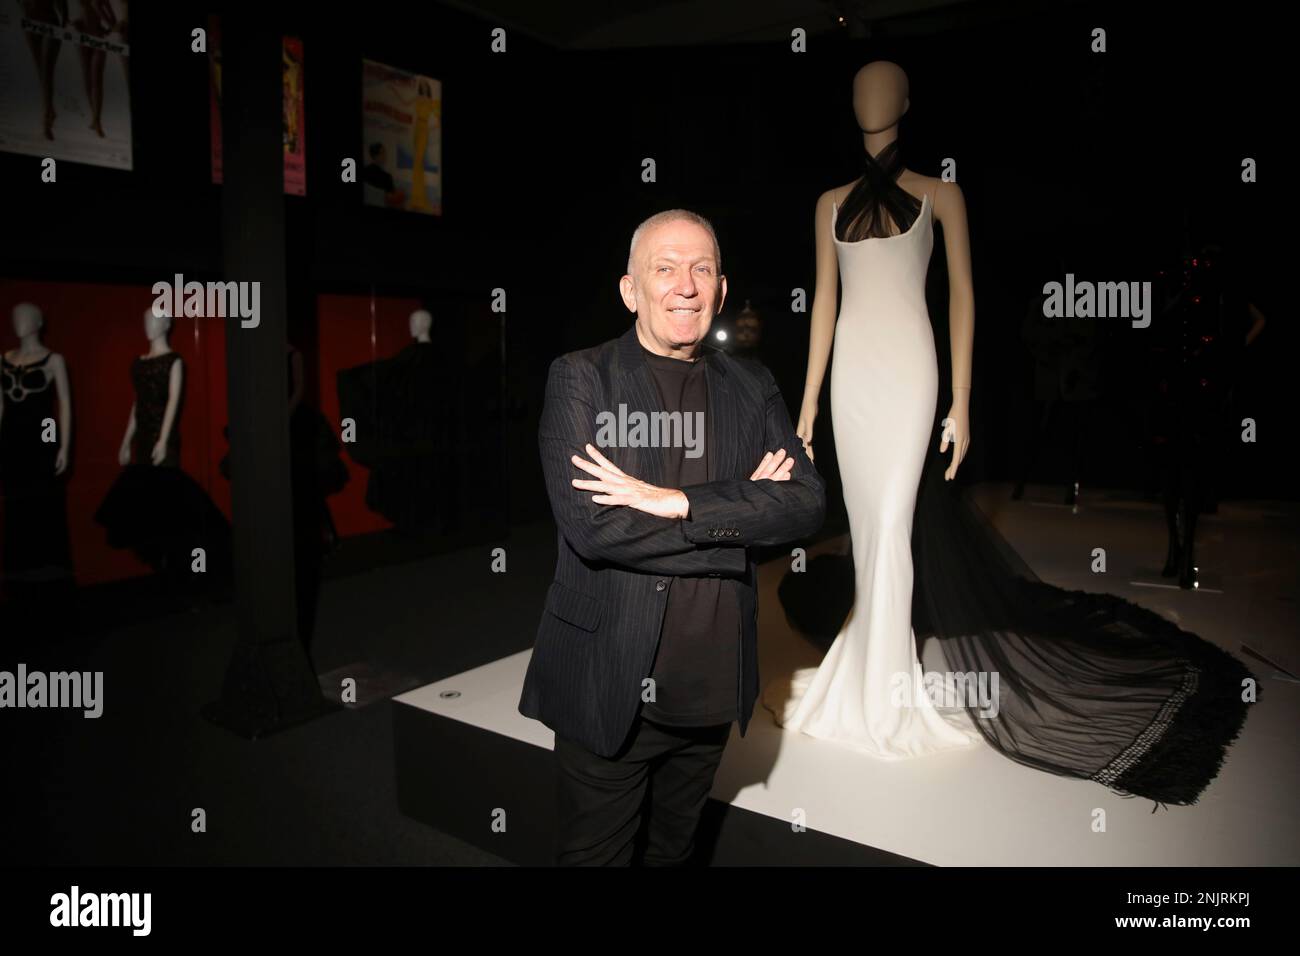 Jean Paul Gaultier, a French fashion designer, poses for a photo